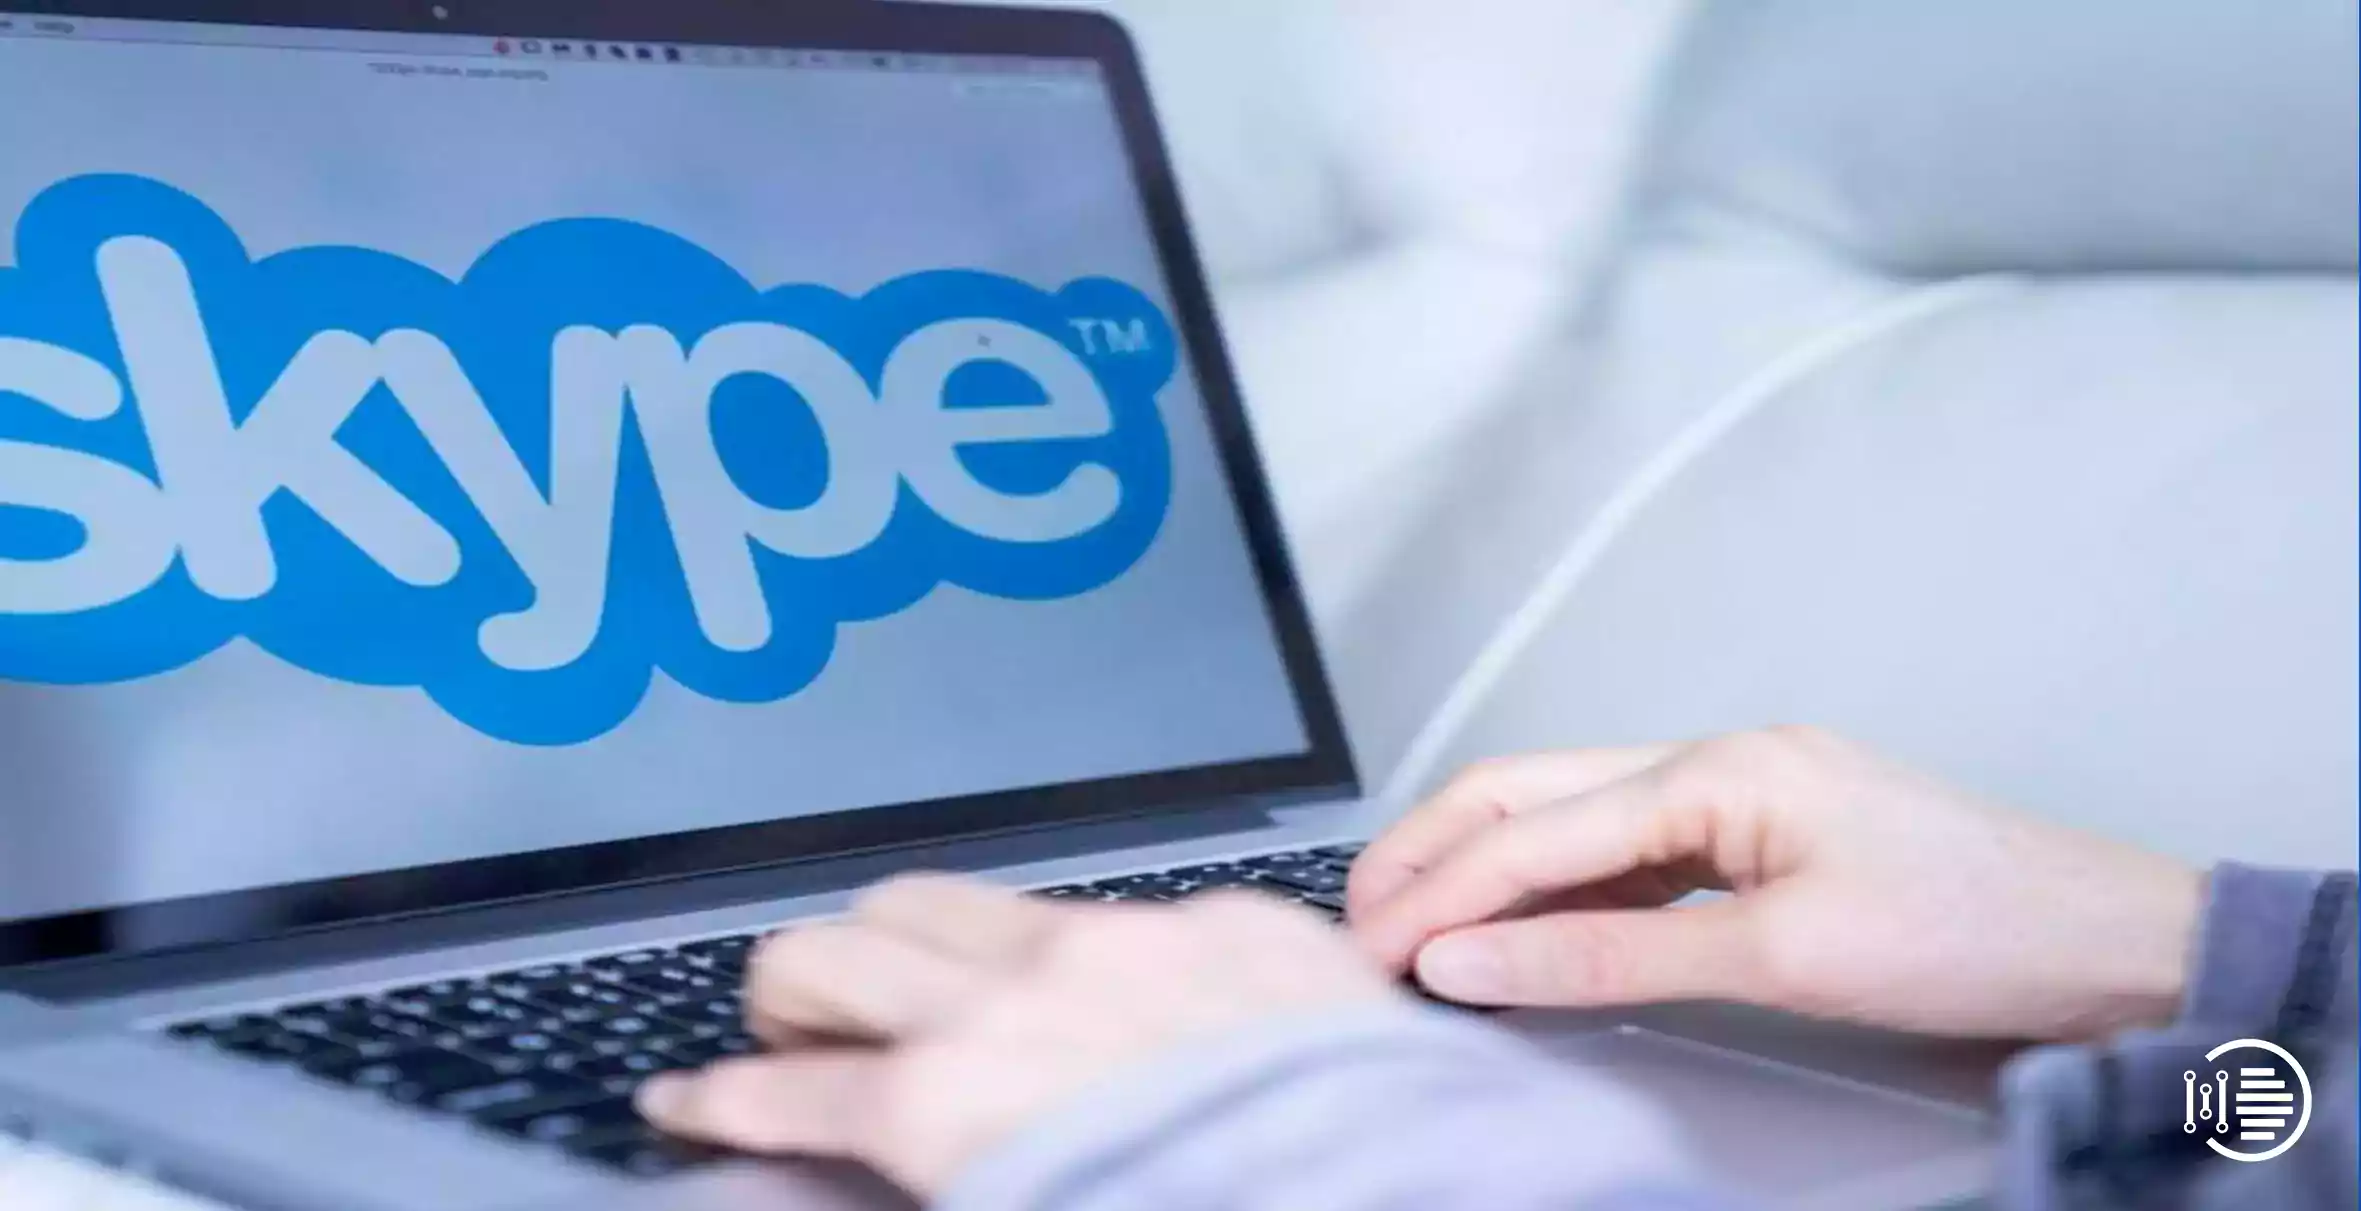 How to easily block access to Skype on a router